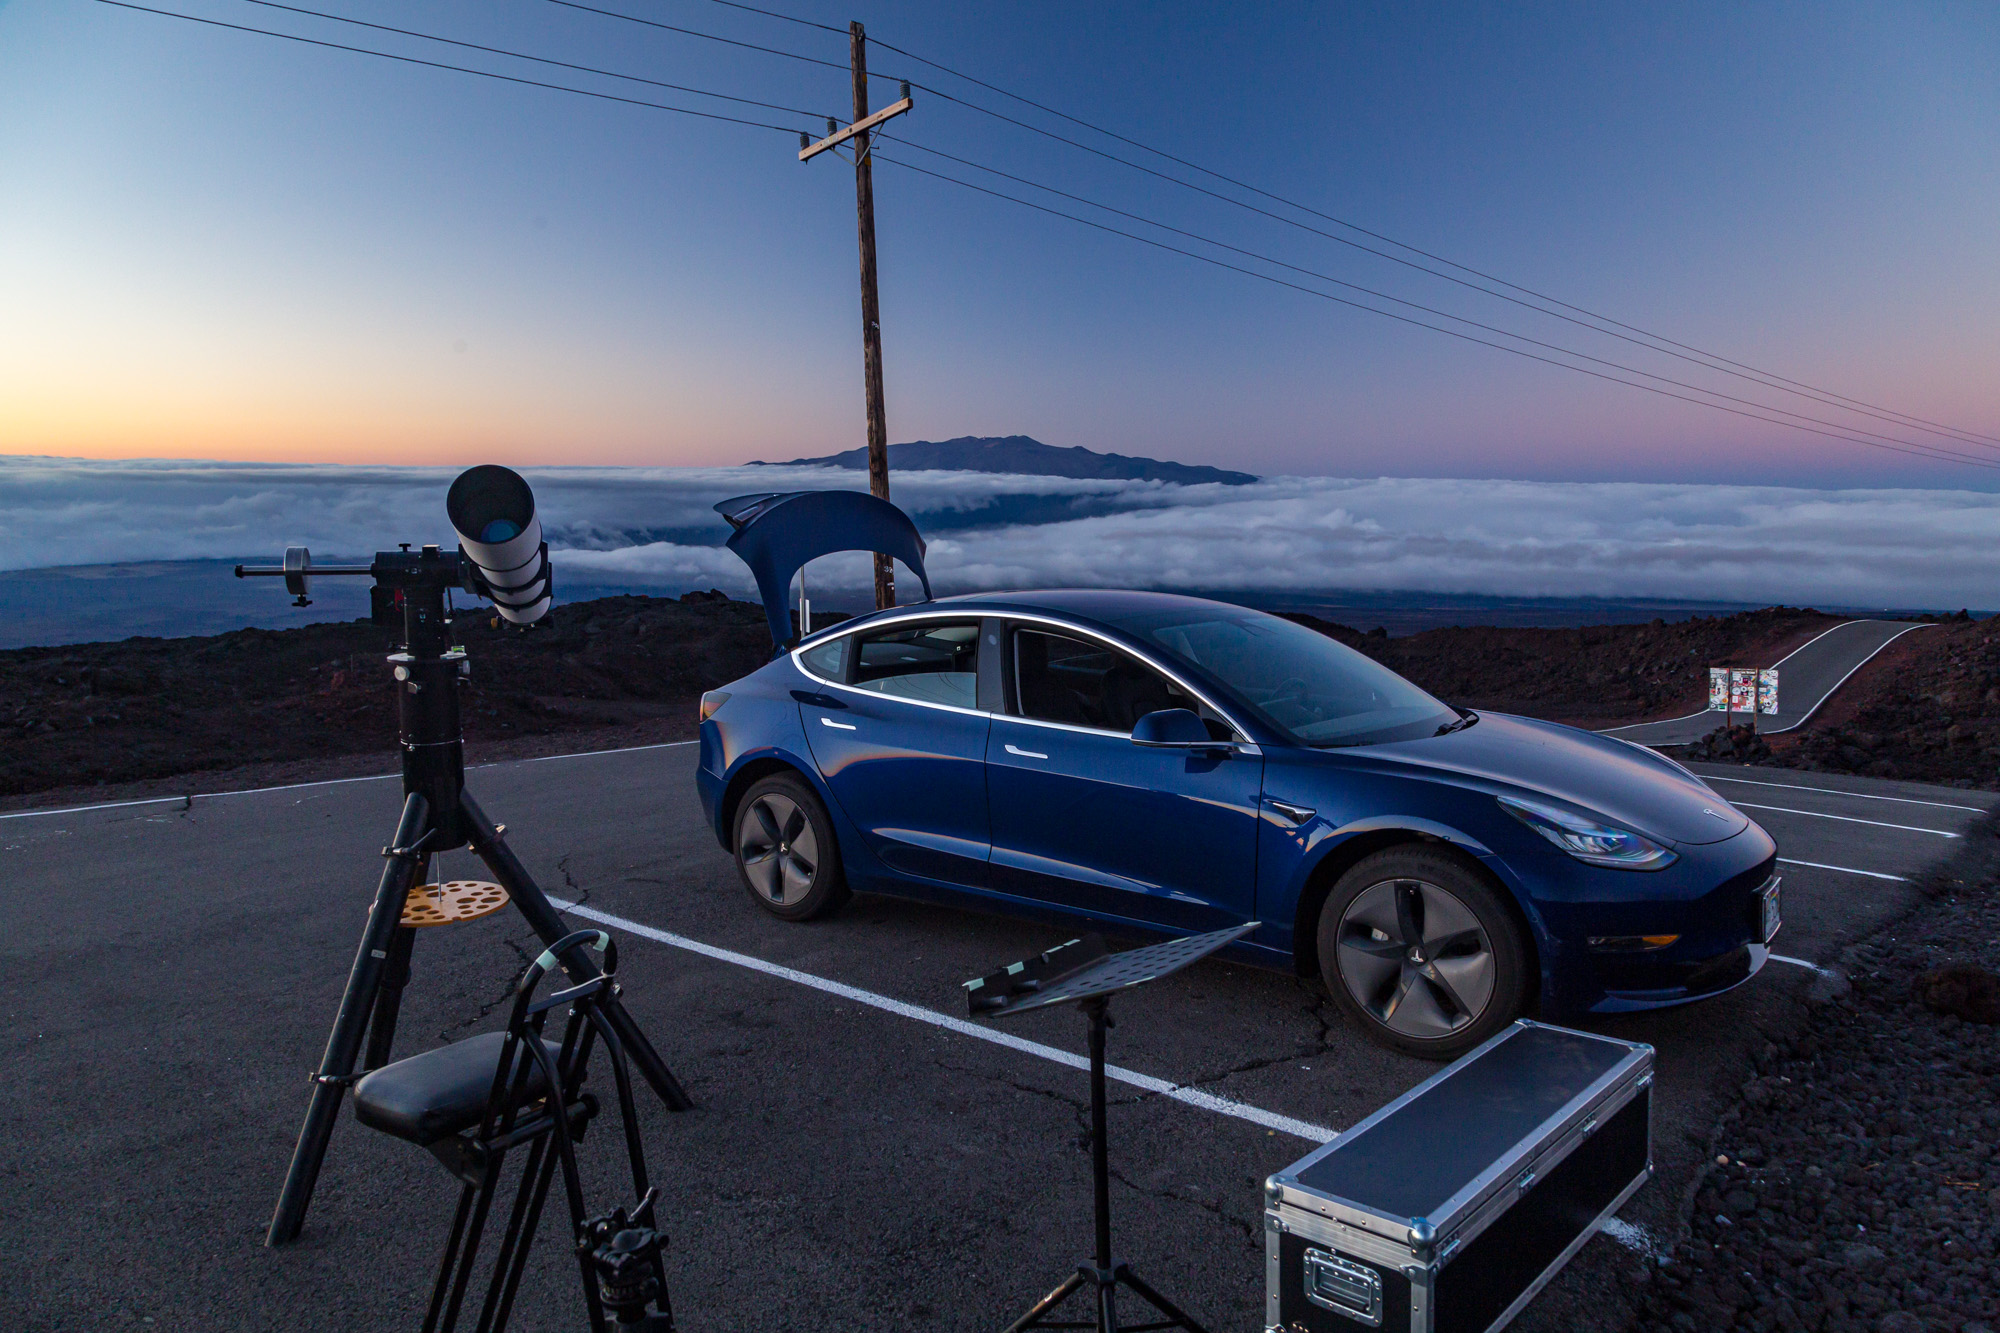 SVX152 set up at the end of the Mauna Loa Access Road with Maunakea in the background.